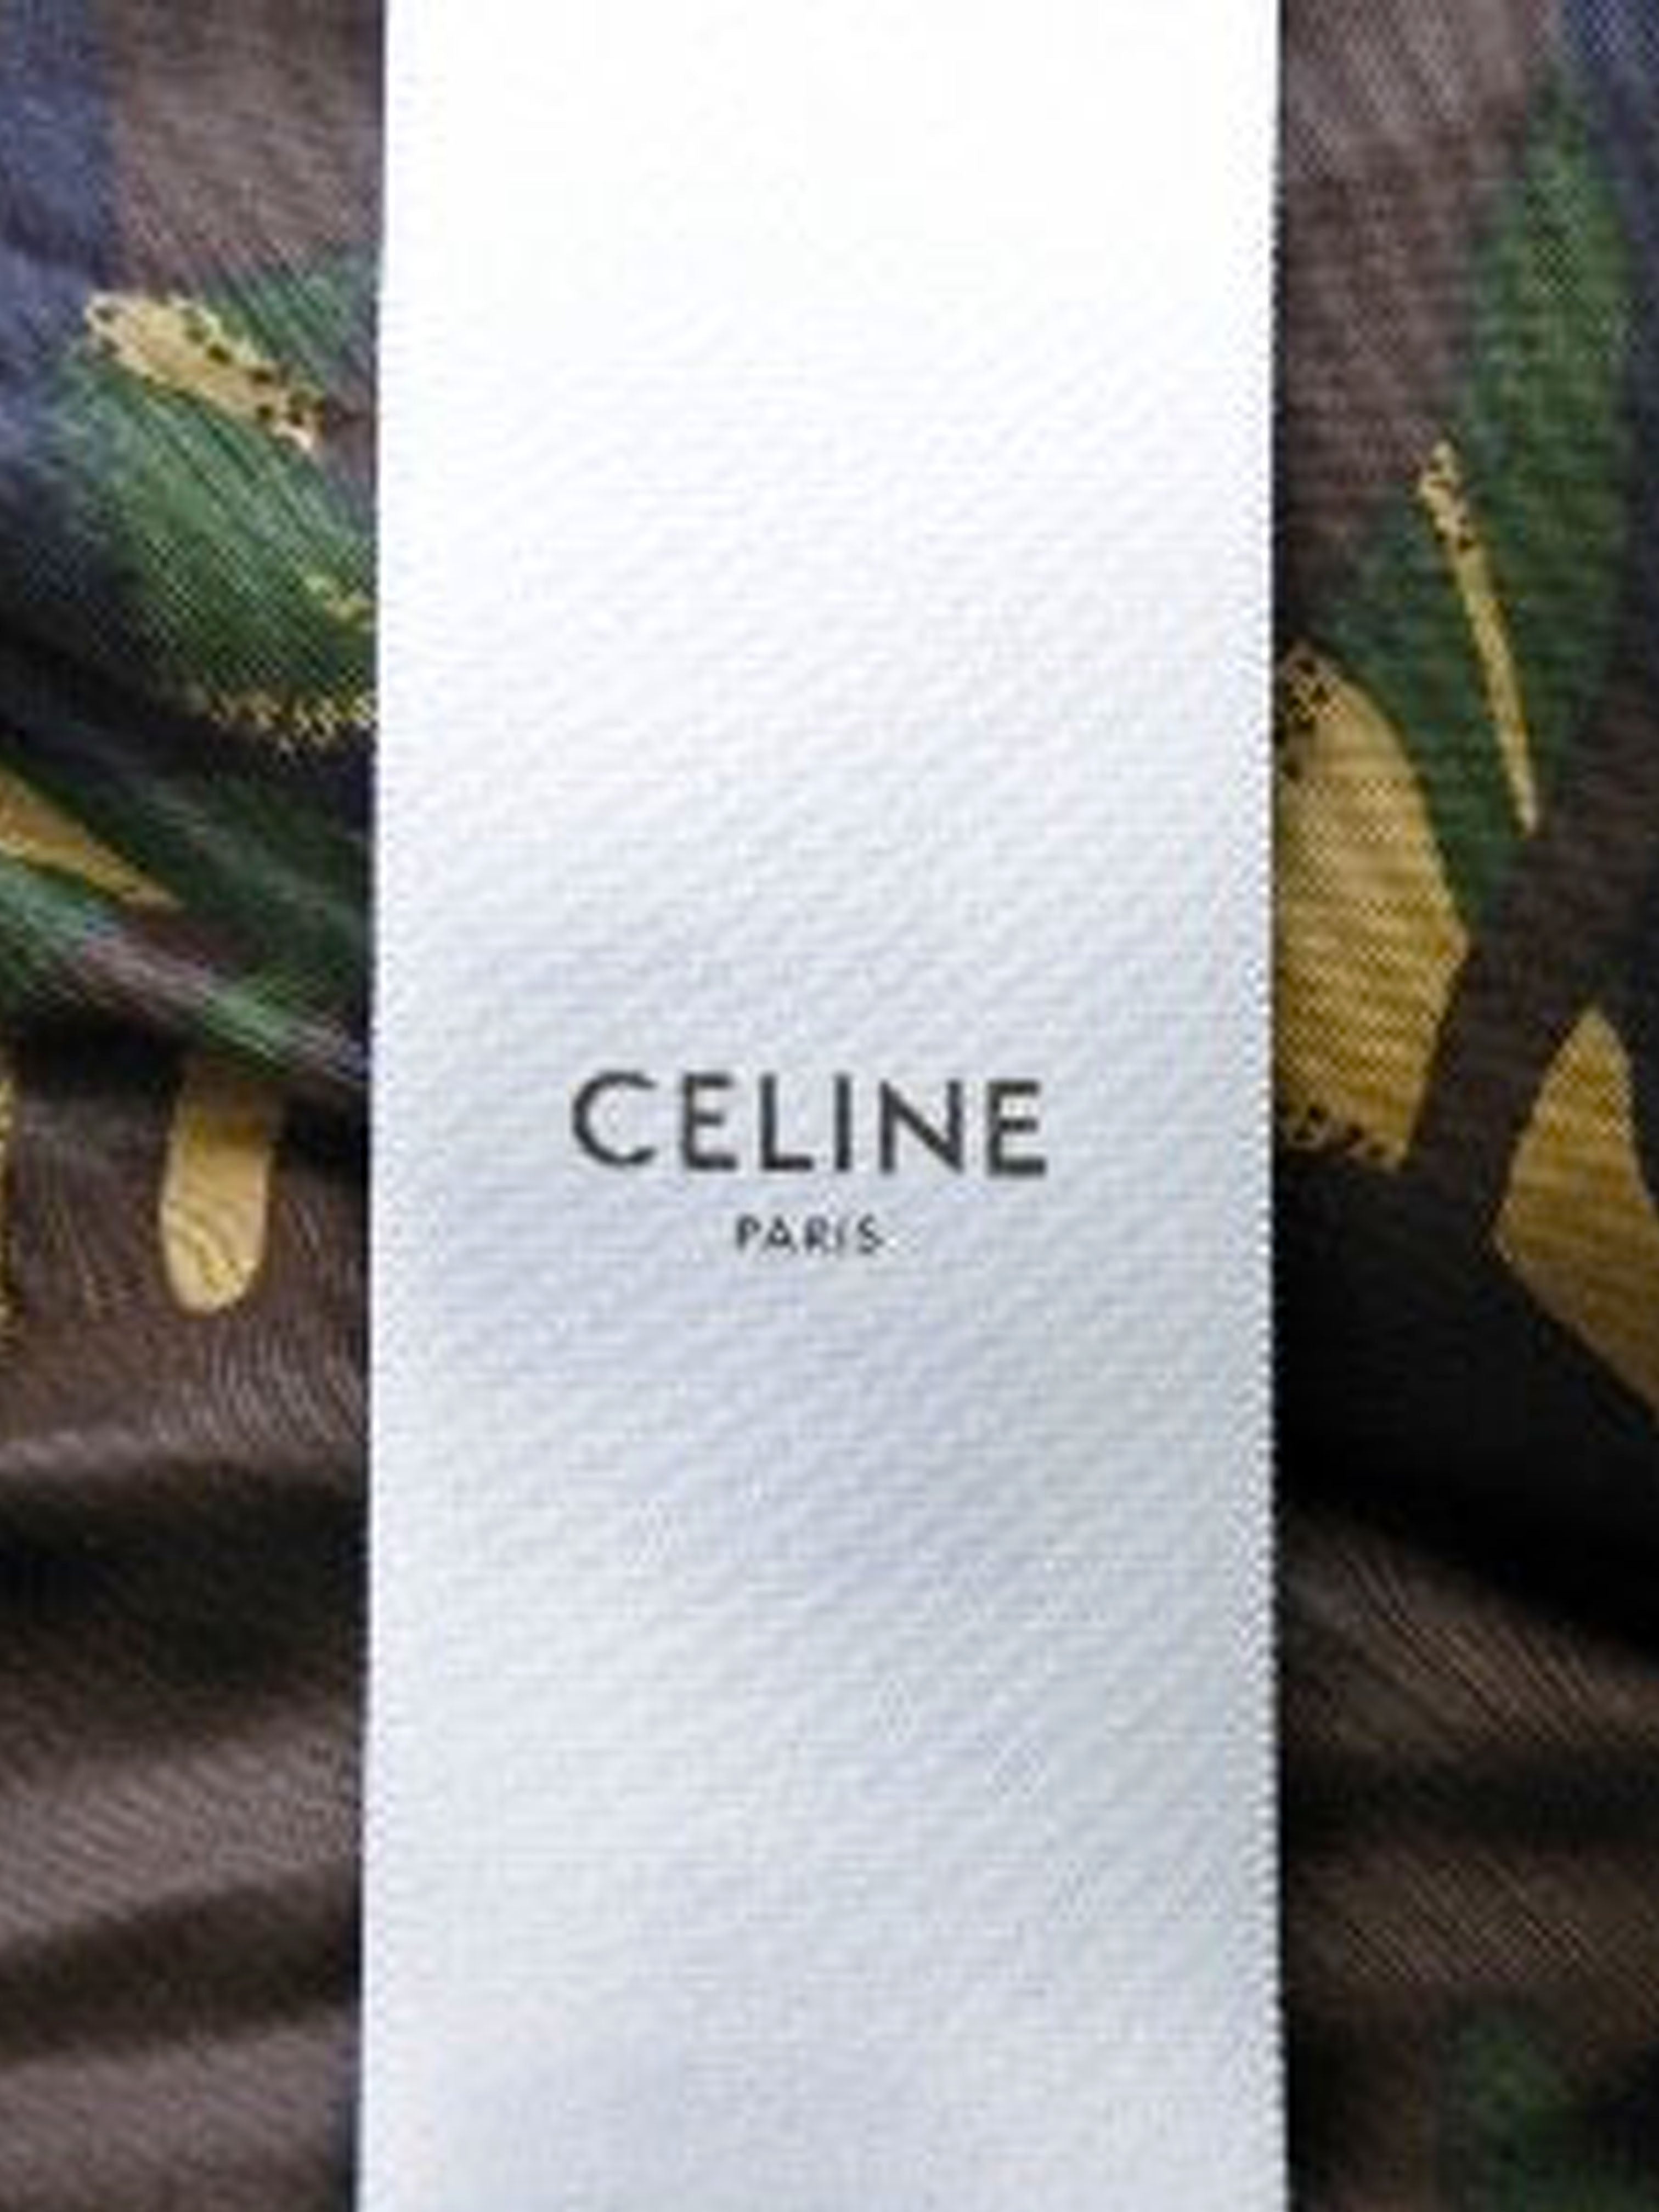 Celine FW 2021 Camouflage Quilted Parka Jacket